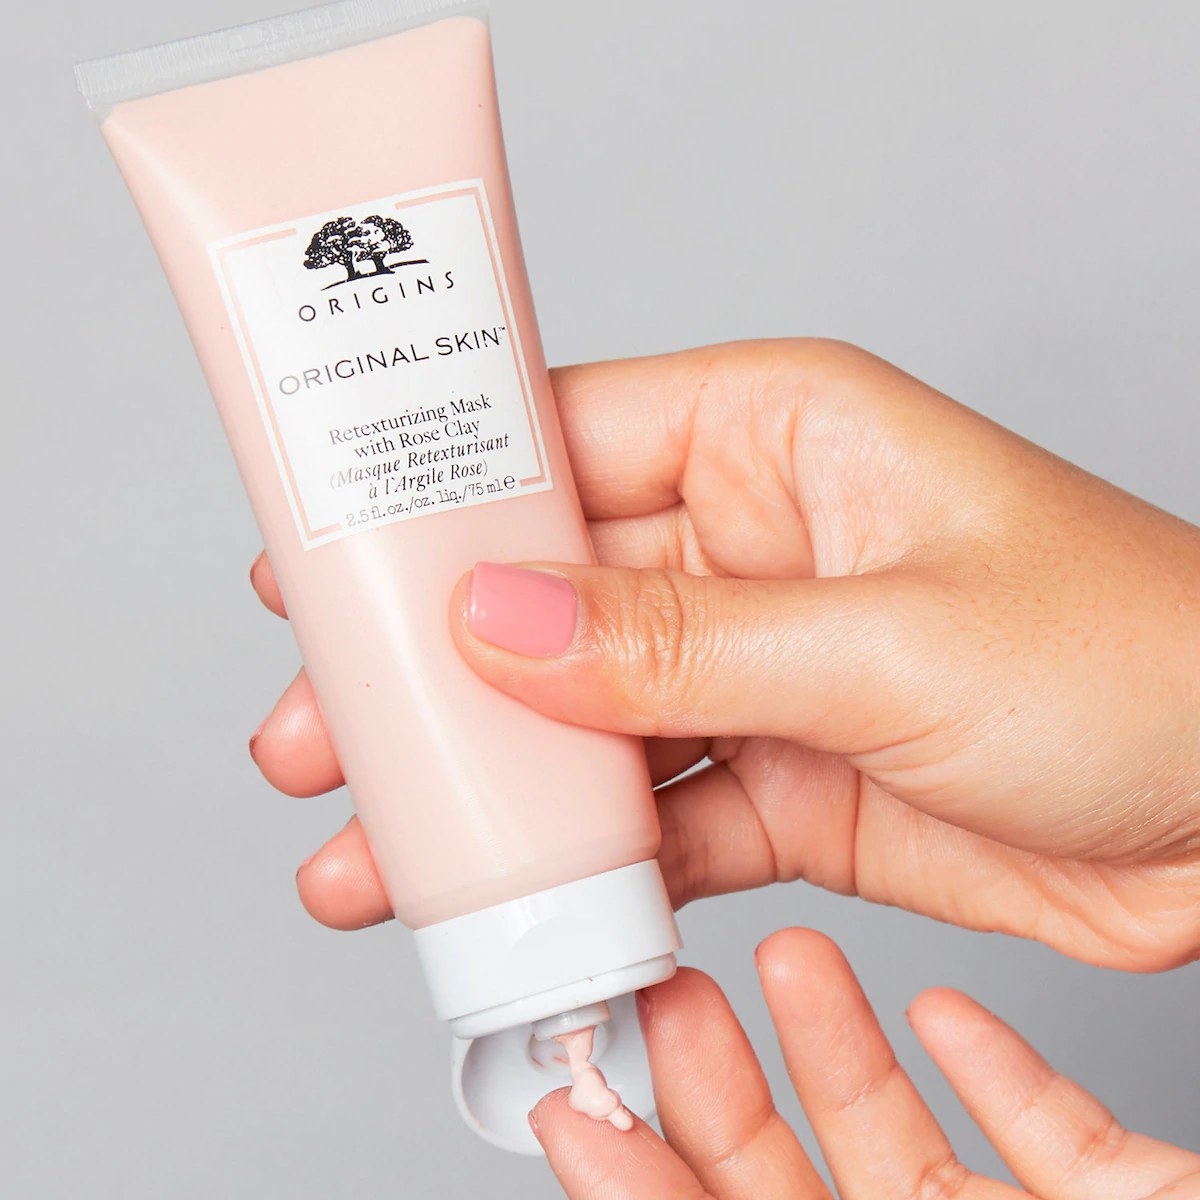 A model holding the face mask tube and squirting some of the pink lotion onto a finger